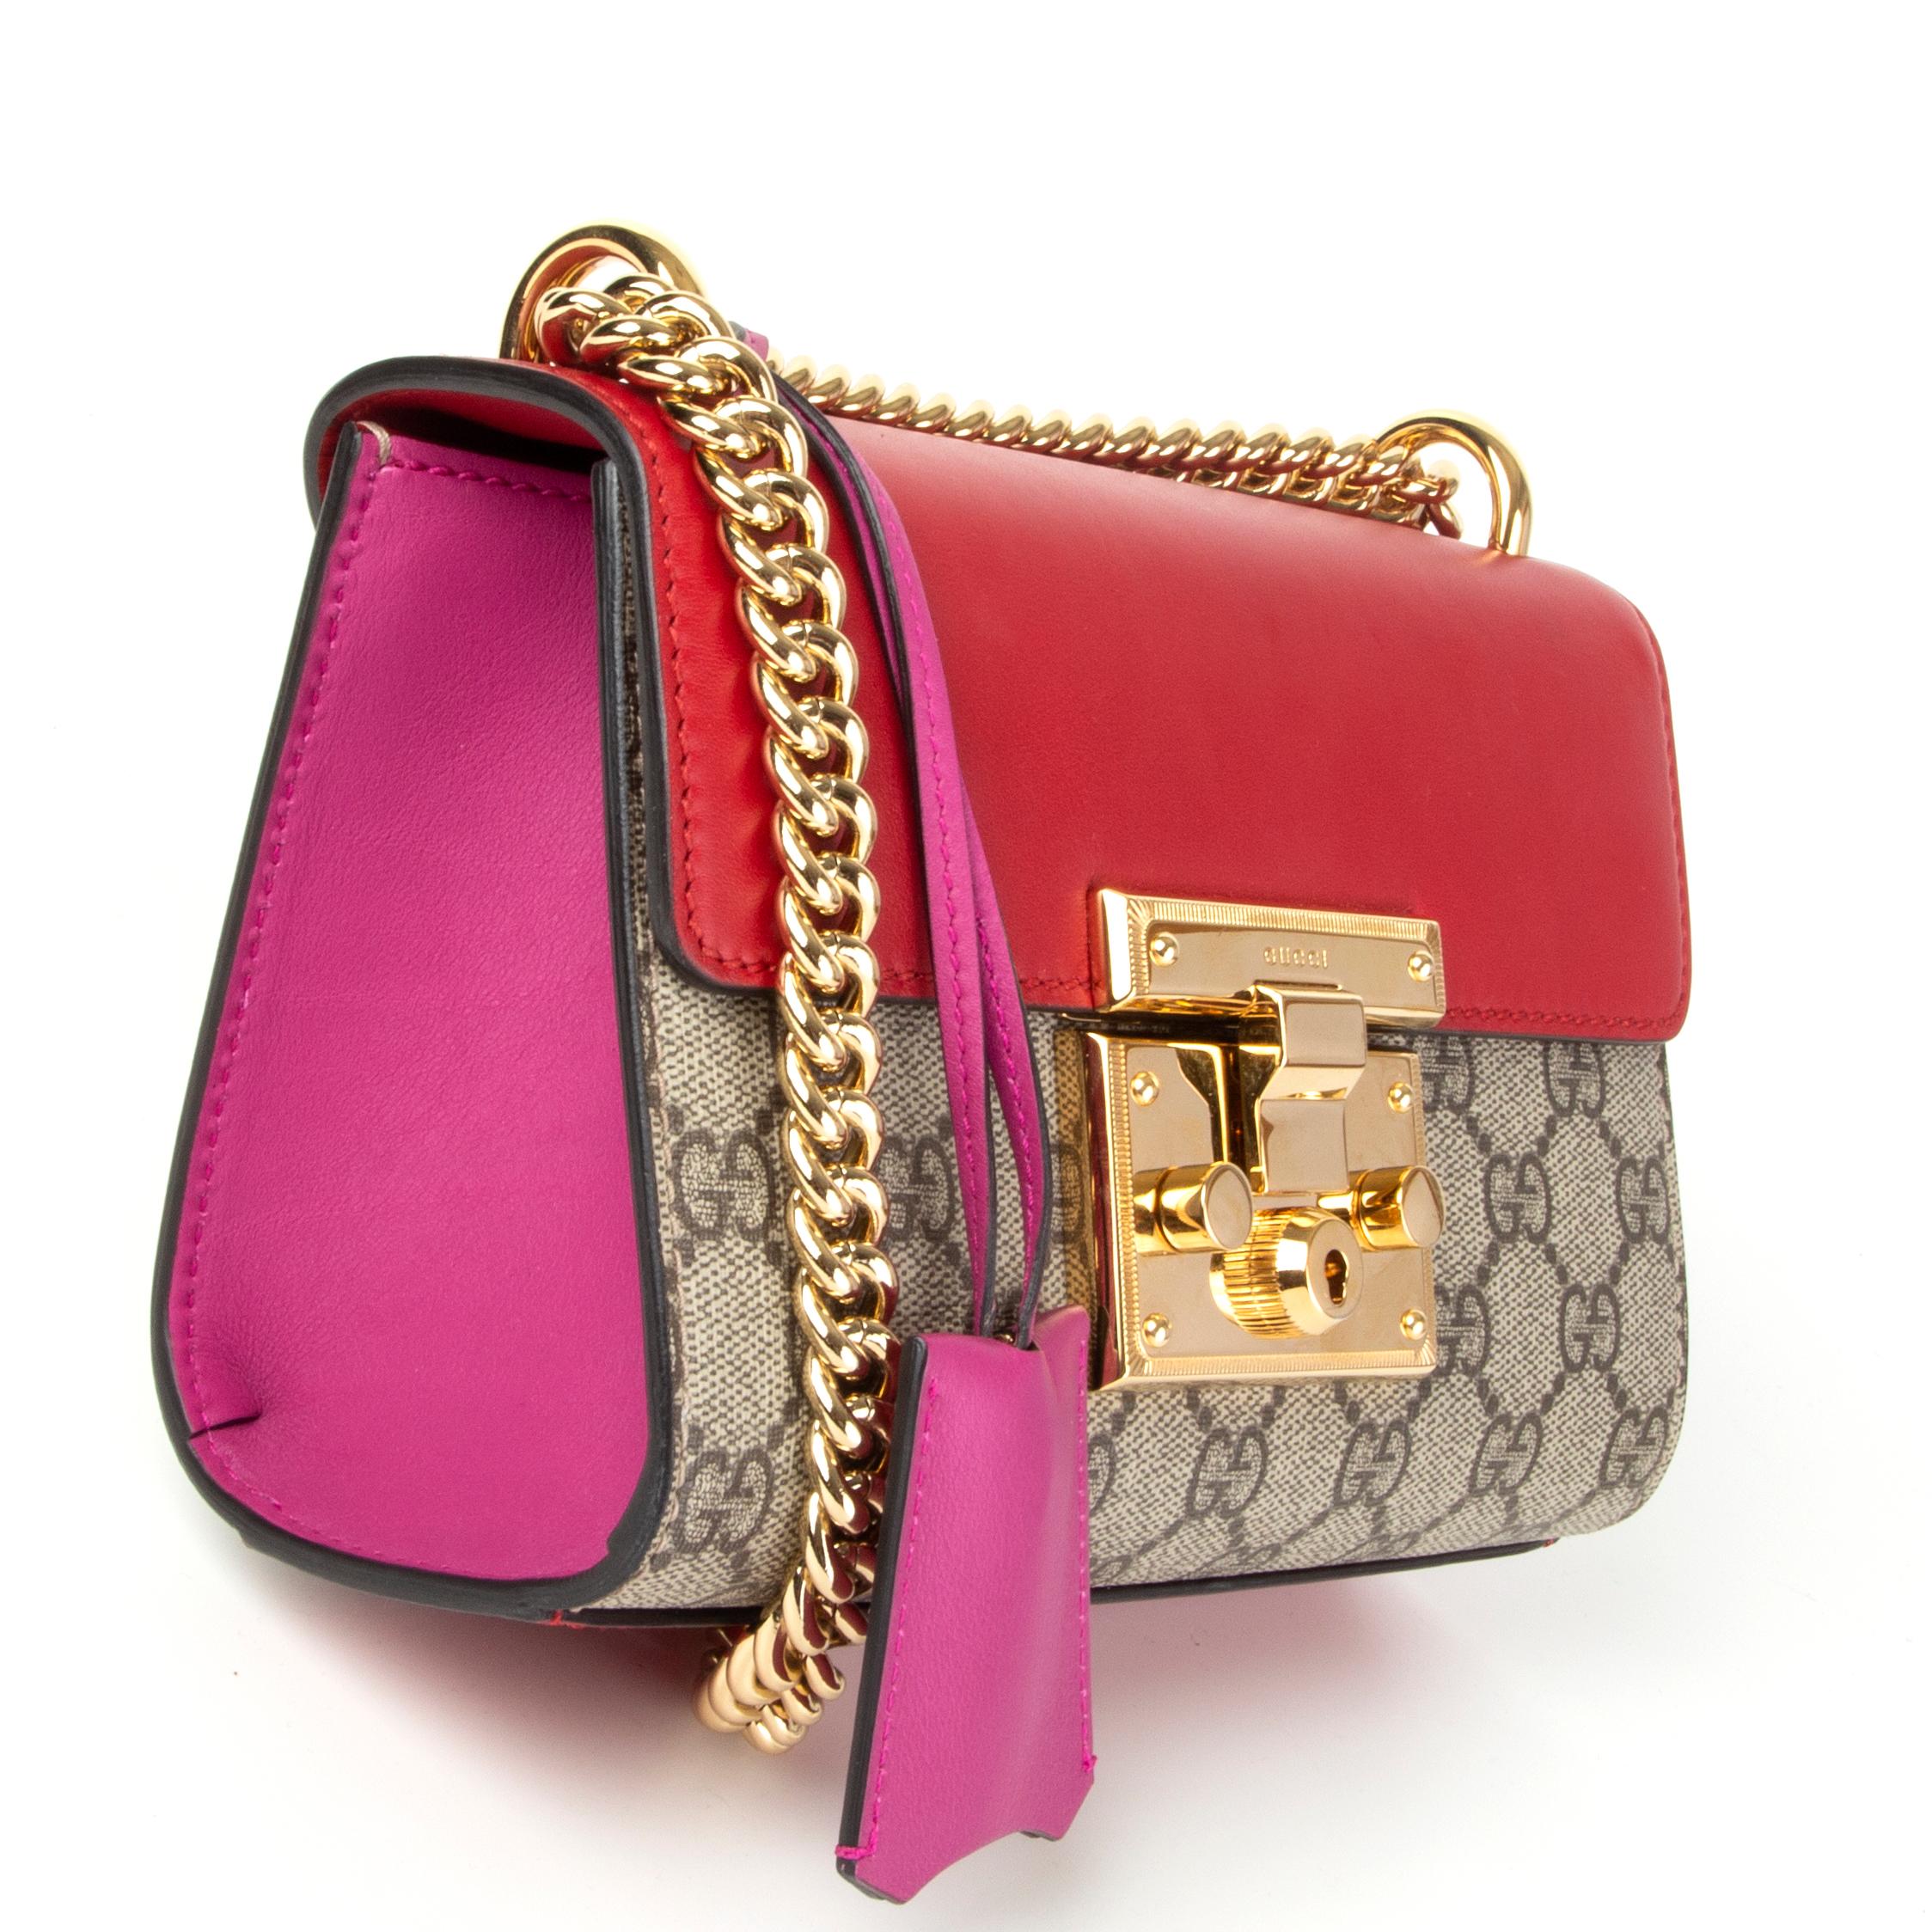 Gucci 'Padlock Small' shoulder bag in hibiscus and pink calfskin featuring beige GG Supreme monogram canvas front and back with a open pocket on the back side. Gold-tone hardware and chain shoulder strap. Lined in tan microfibre with one open pocket